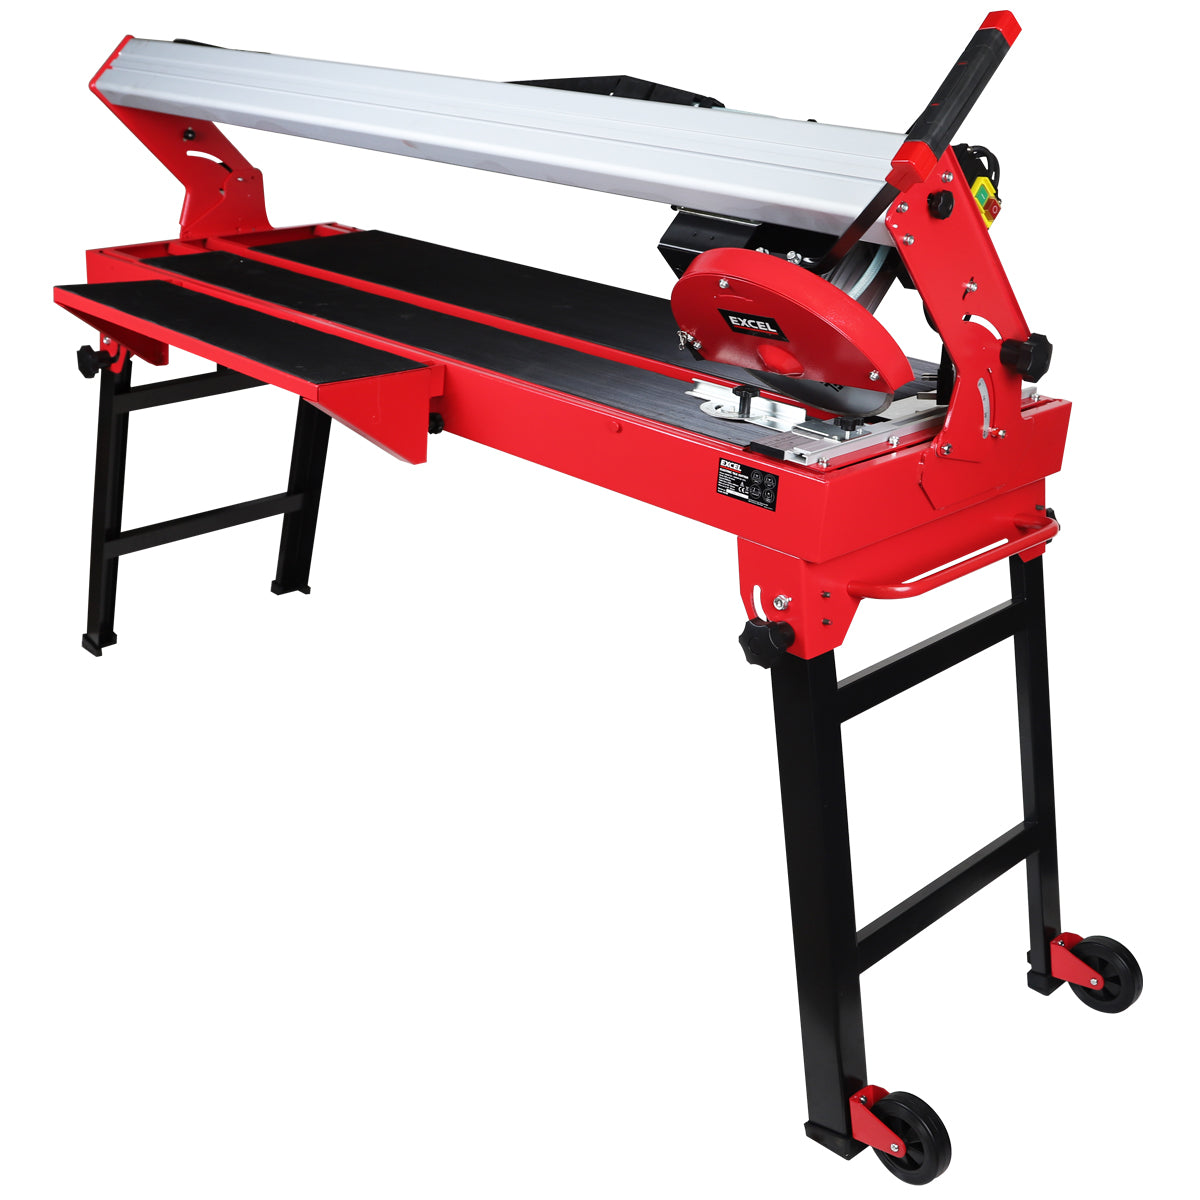 Excel 1250mm Wet Tile Cutter Bridge Saw 240V/1200W with Free Diamond Blade